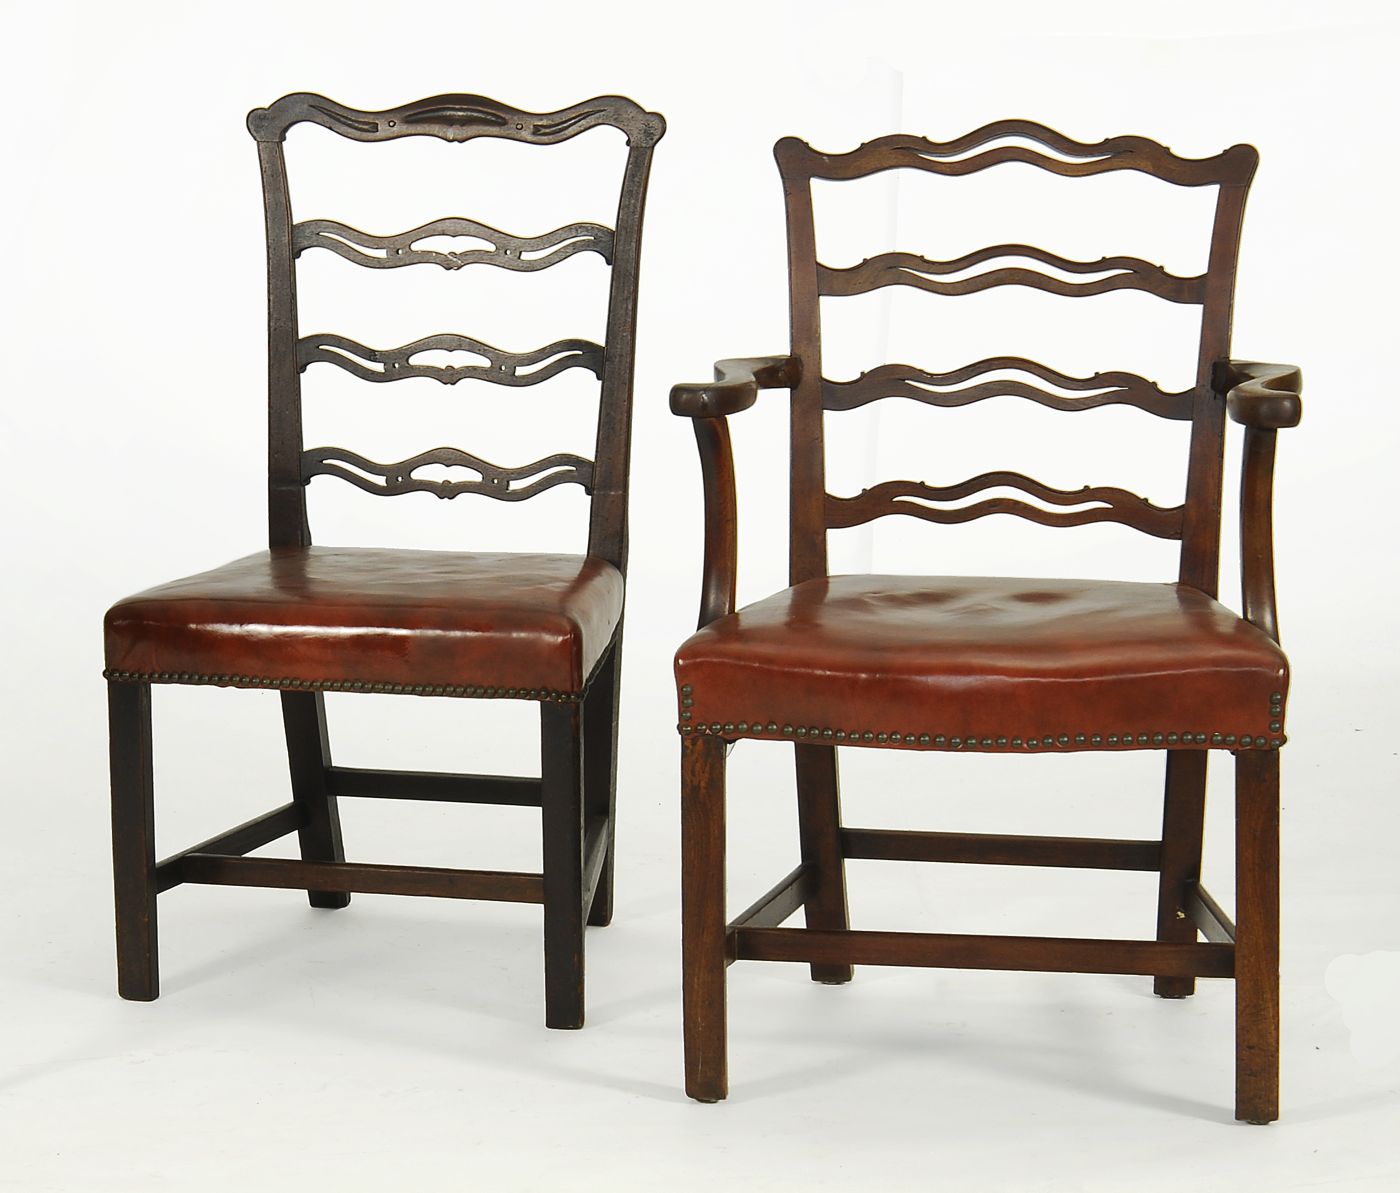 TWO ANTIQUE CHIPPENDALE CHAIRS18th CenturyIn